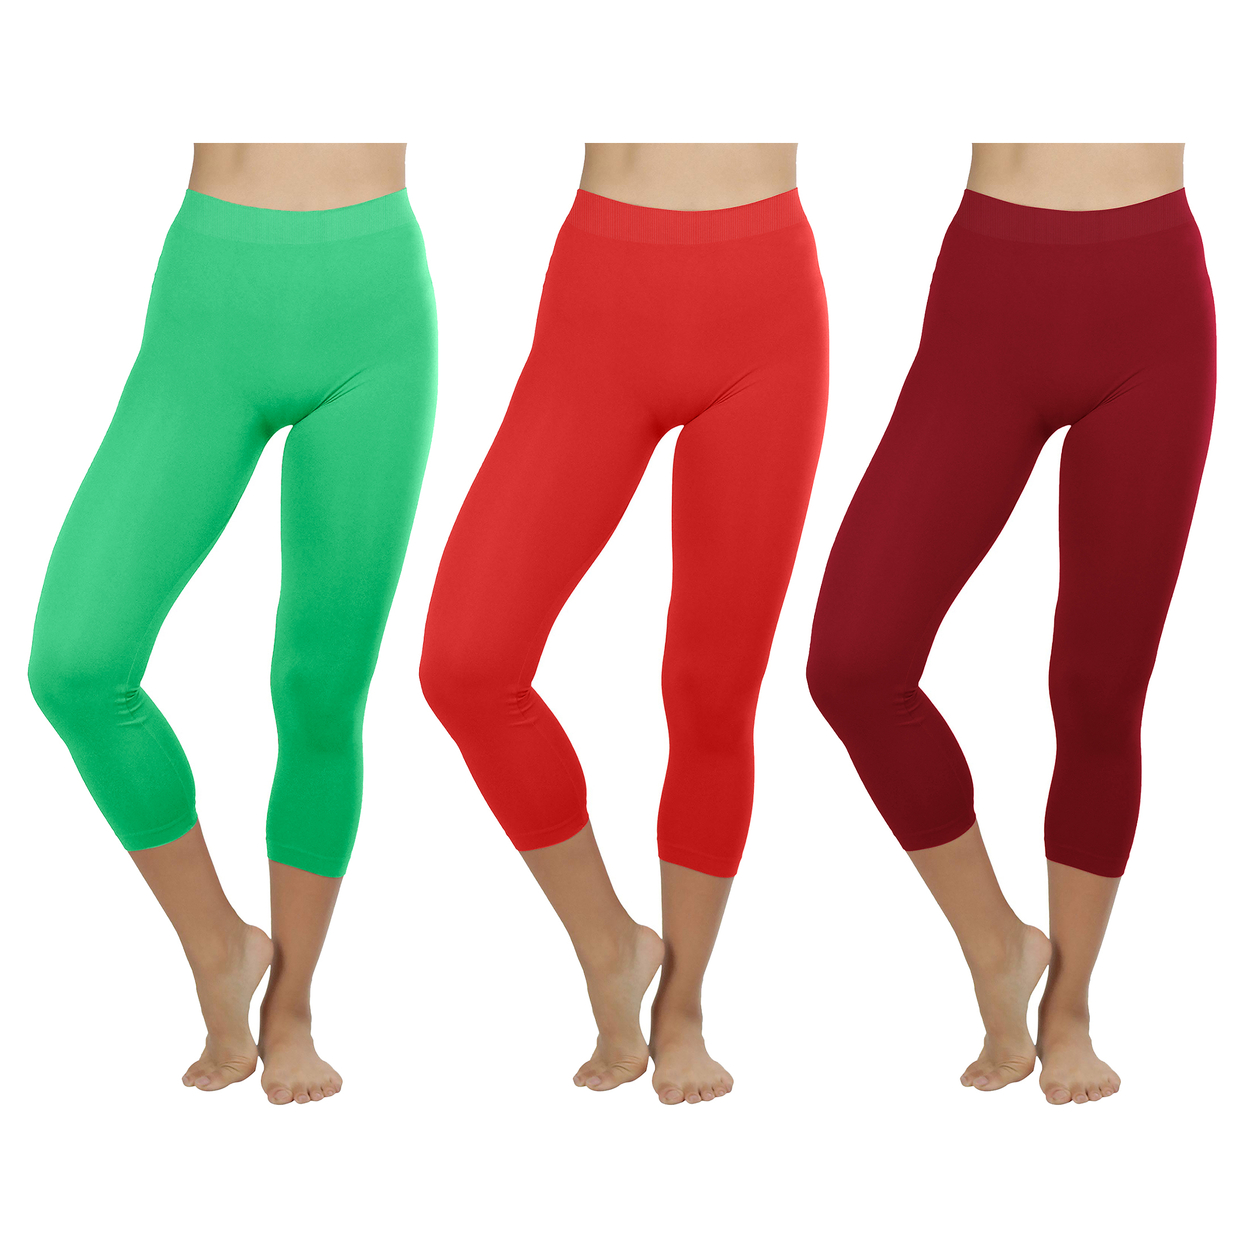 3-Pack: Women's Ultra-Soft High Waisted Smooth Stretch Active Yoga Capri Leggings - Green,red,burgundy, X-large